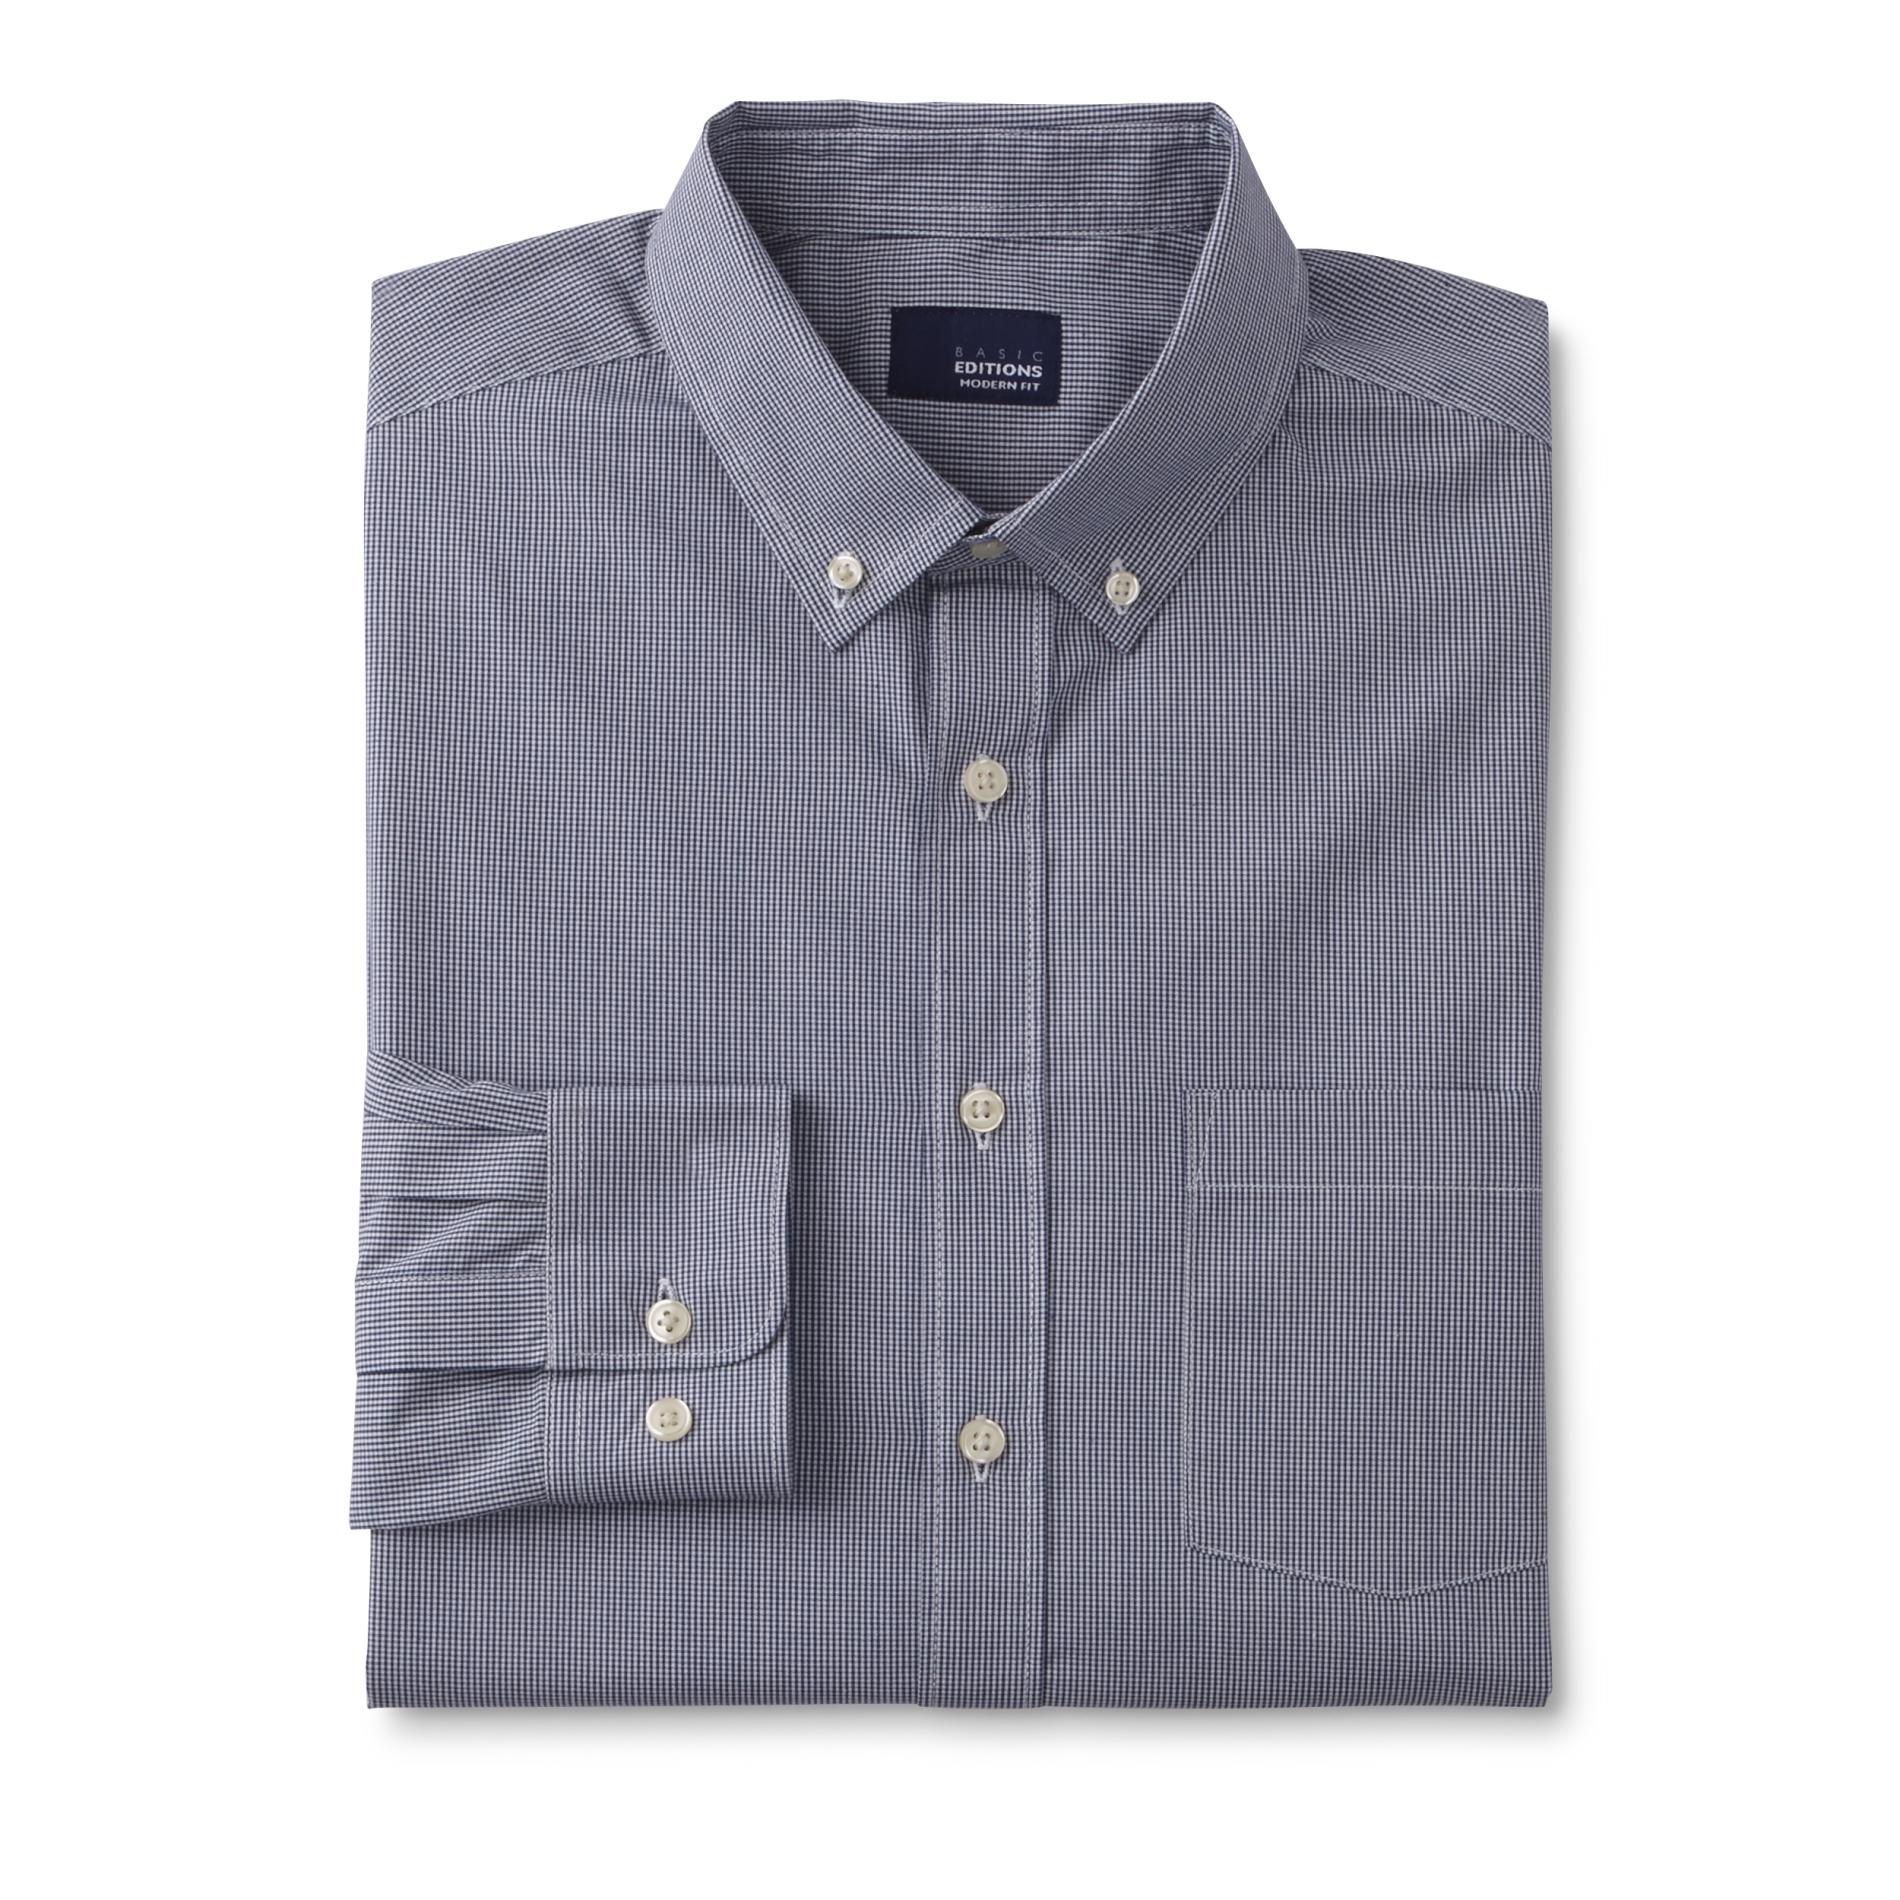 Basic Editions Men's Button-Front Shirt - Checkered